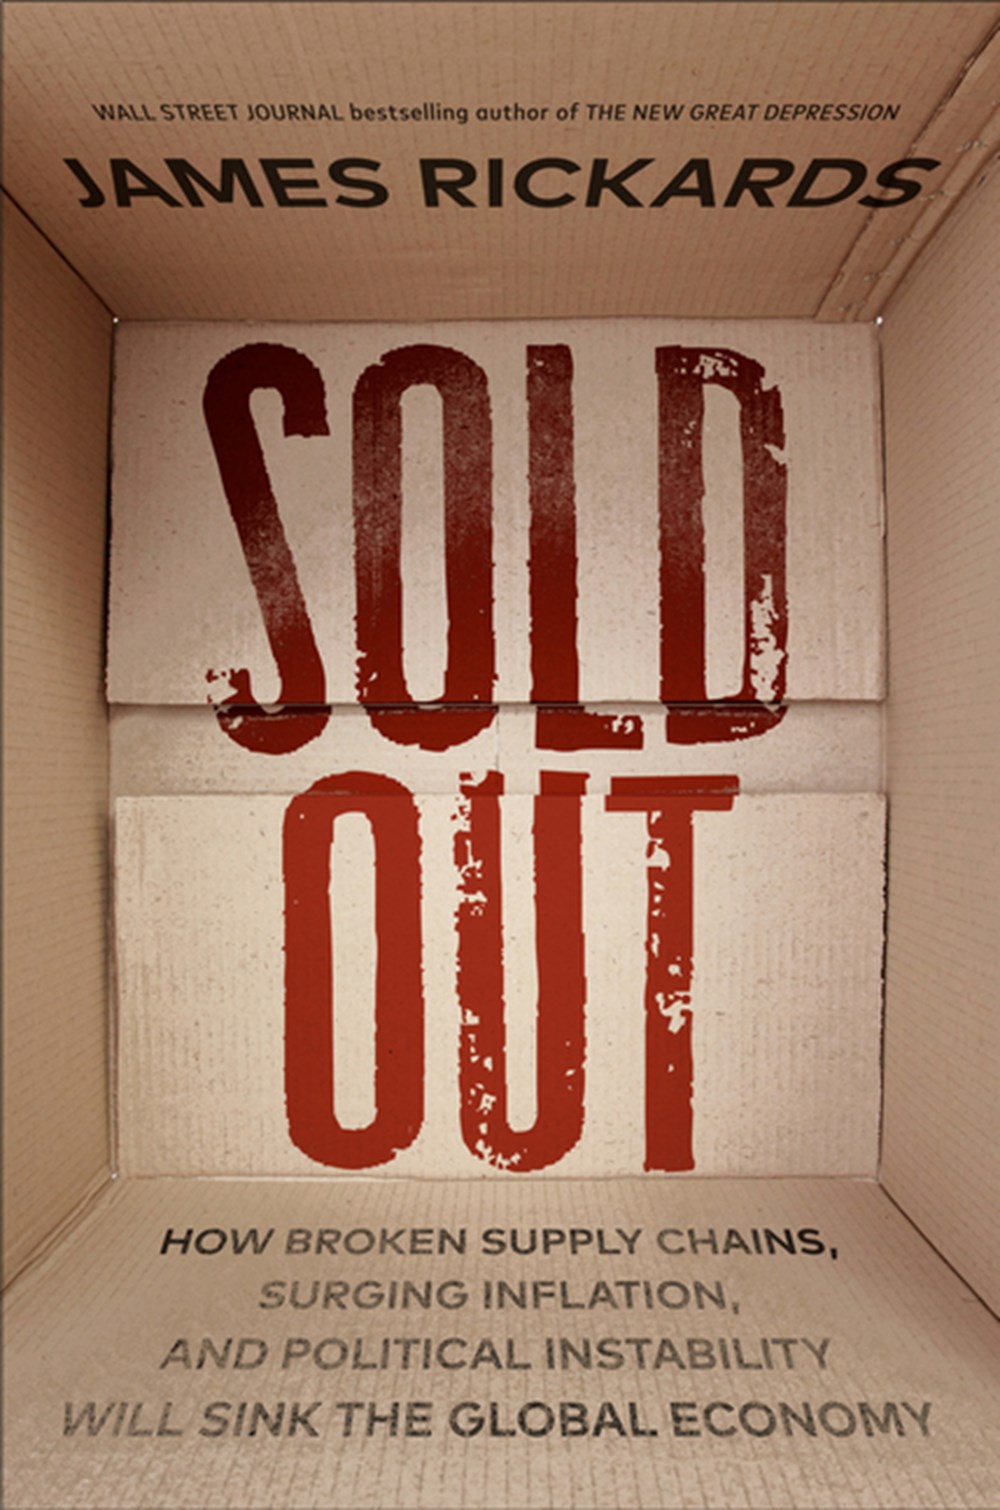 Sold Out: How Broken Supply Chains, Surging Inflation, and Political Instability Will Sink the Globa